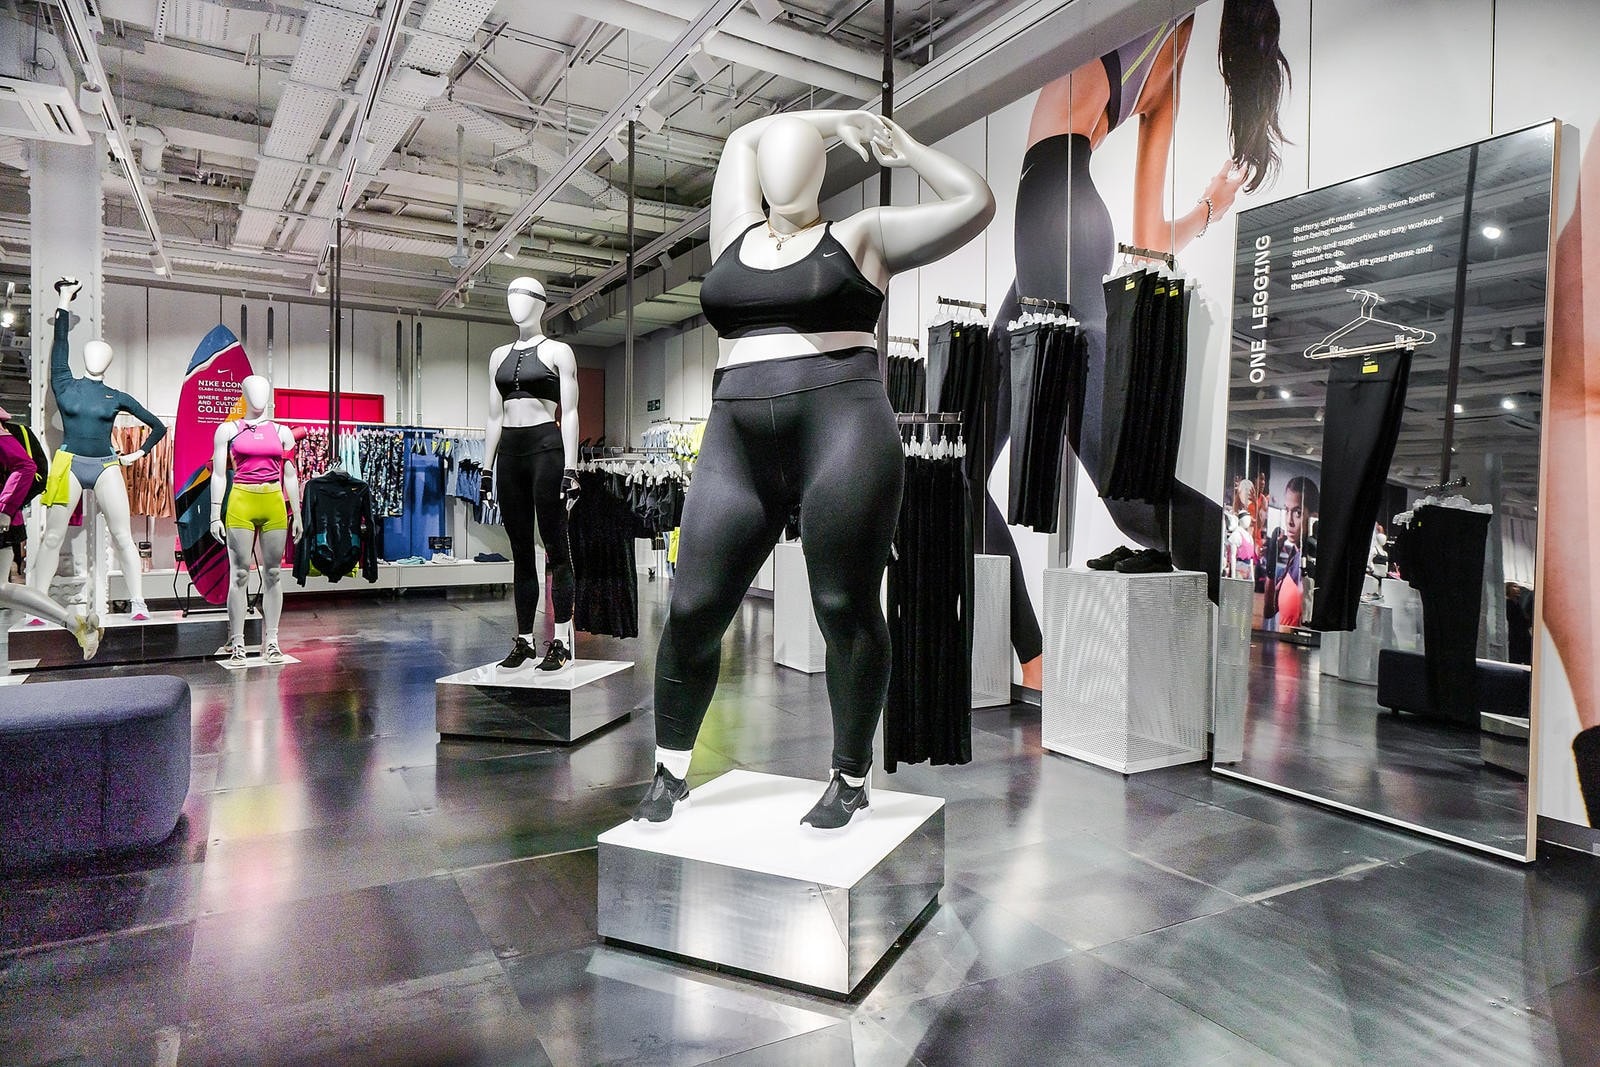 https://image-cdn.hypb.st/https%3A%2F%2Fhypebeast.com%2Fimage%2F2019%2F06%2Fnike-niketown-london-plus-size-mannequins-in-store-1-1.jpg?cbr=1&q=90